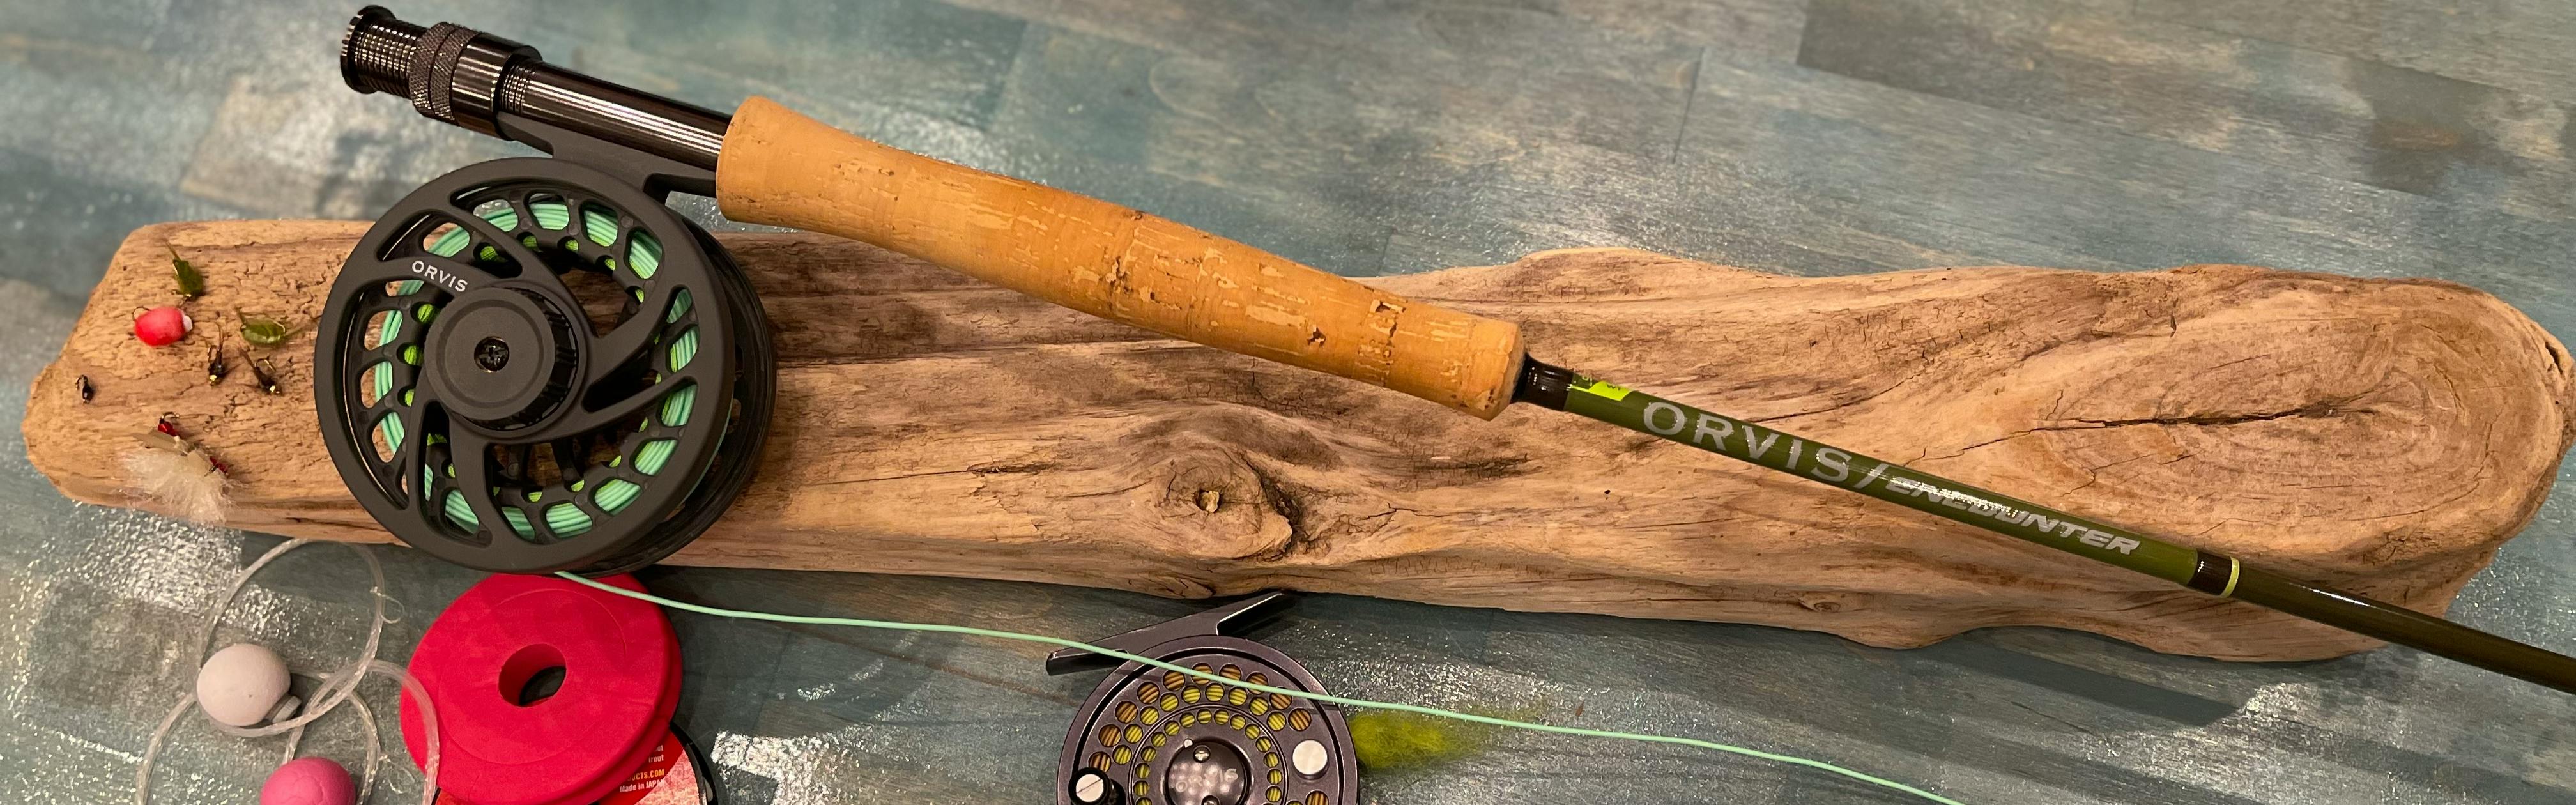 Expert Review: Orvis Clearwater Fly Rod Outfit